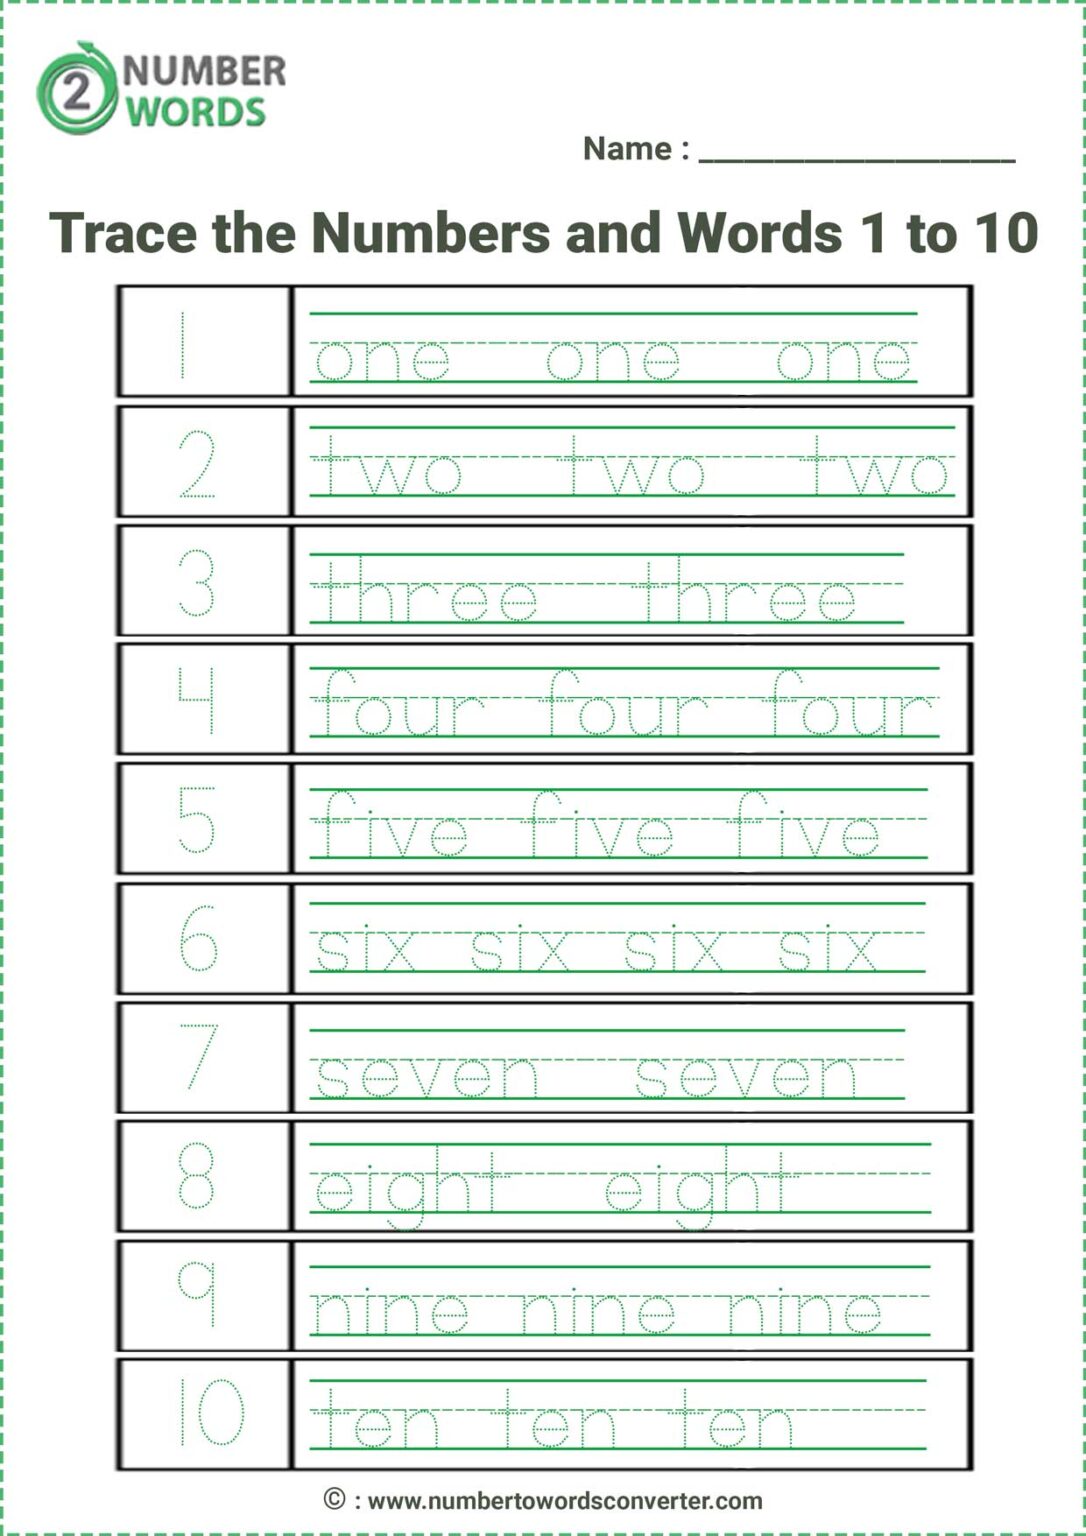 counting-numbers-in-english-from-1-to-100-spelling-chart-vrogue